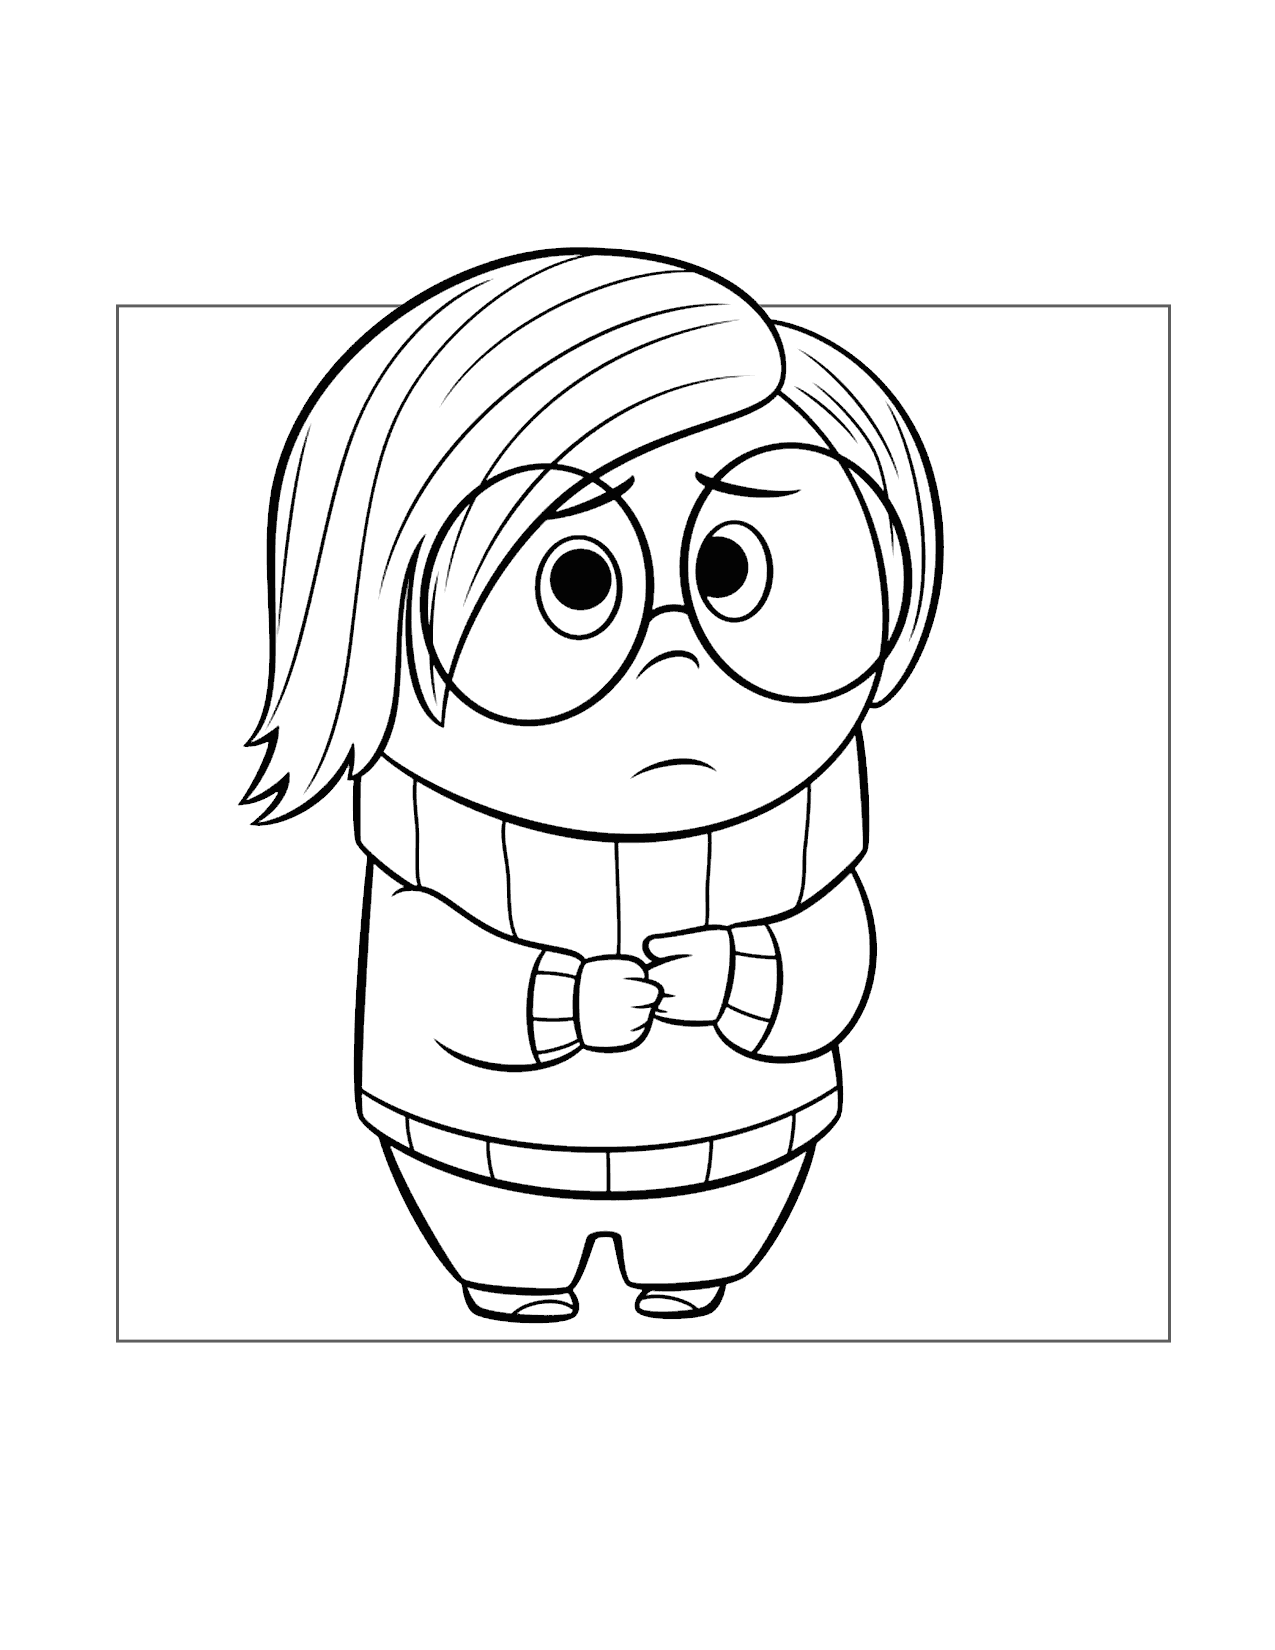 Sadness Inside Out Coloring Page